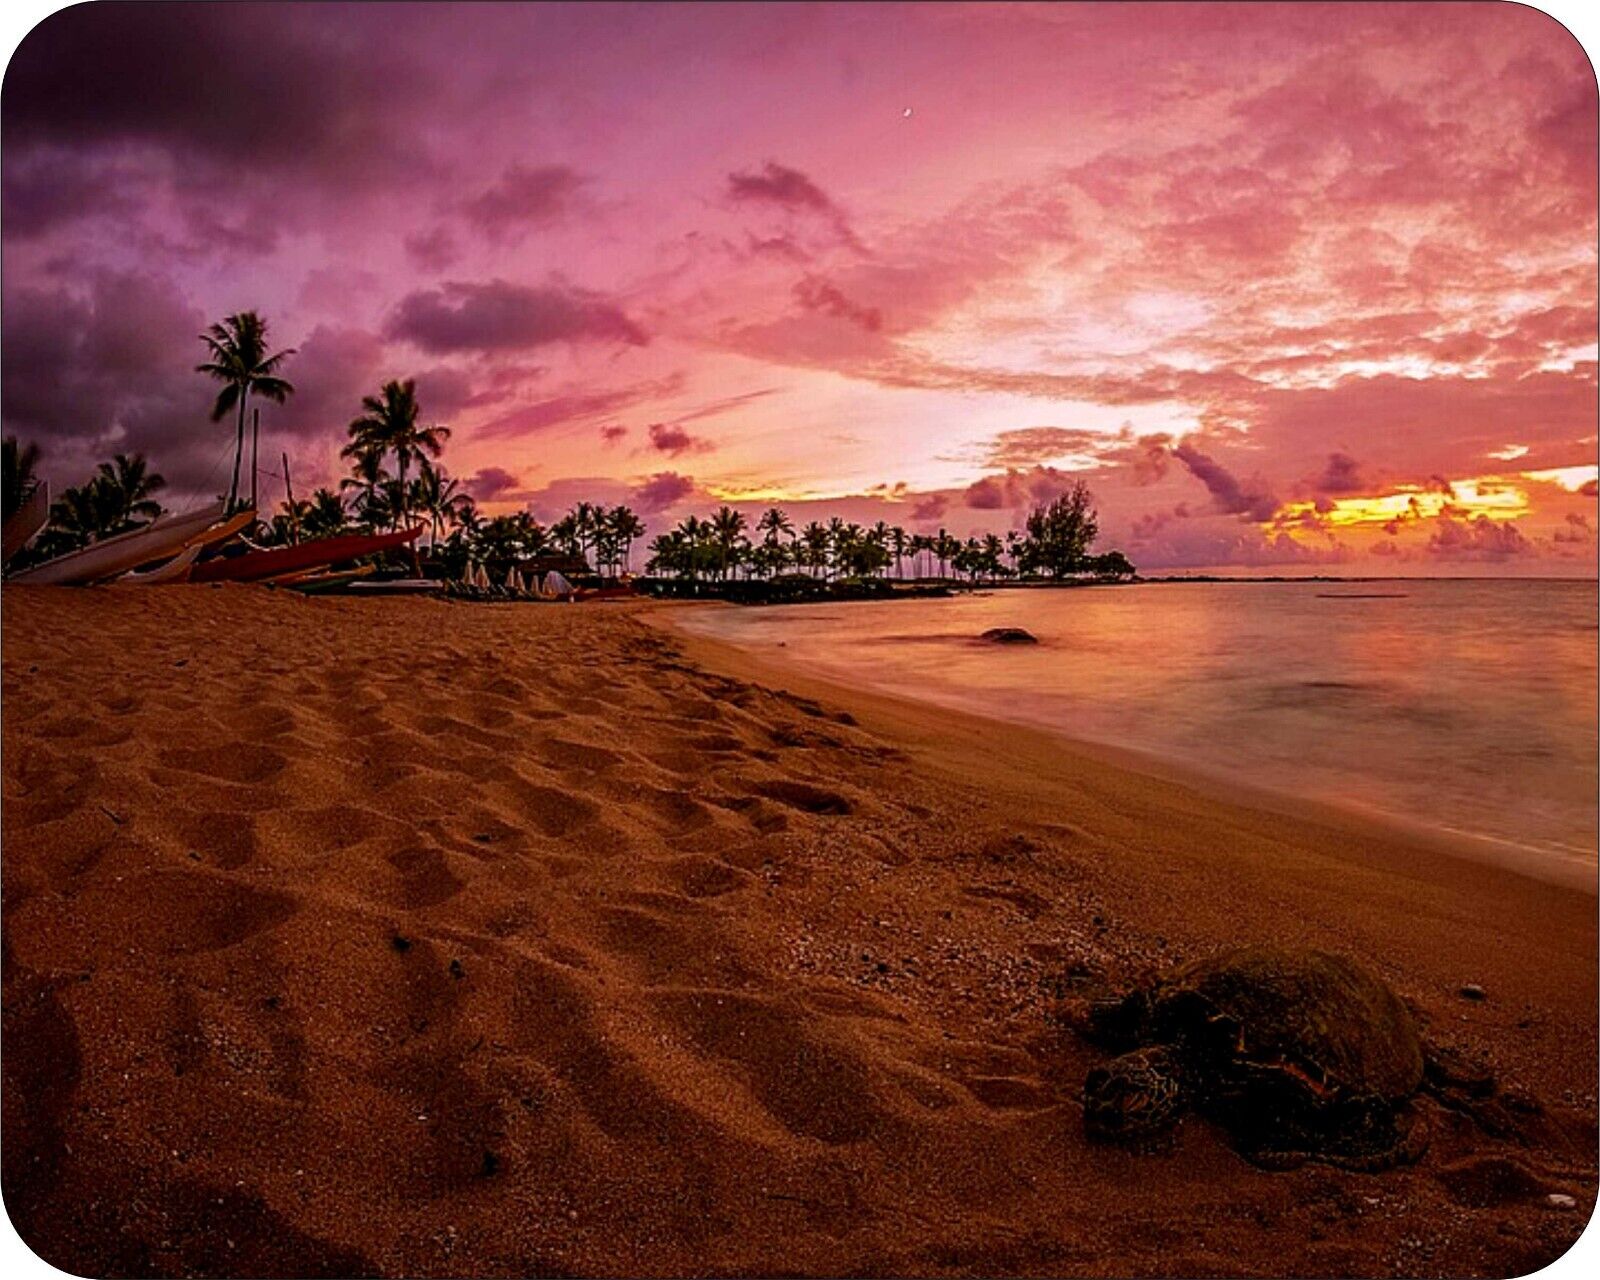 Hawaii Sunset Beaches PAlm Trees Photo Art Designs Novelty Mouse Pad